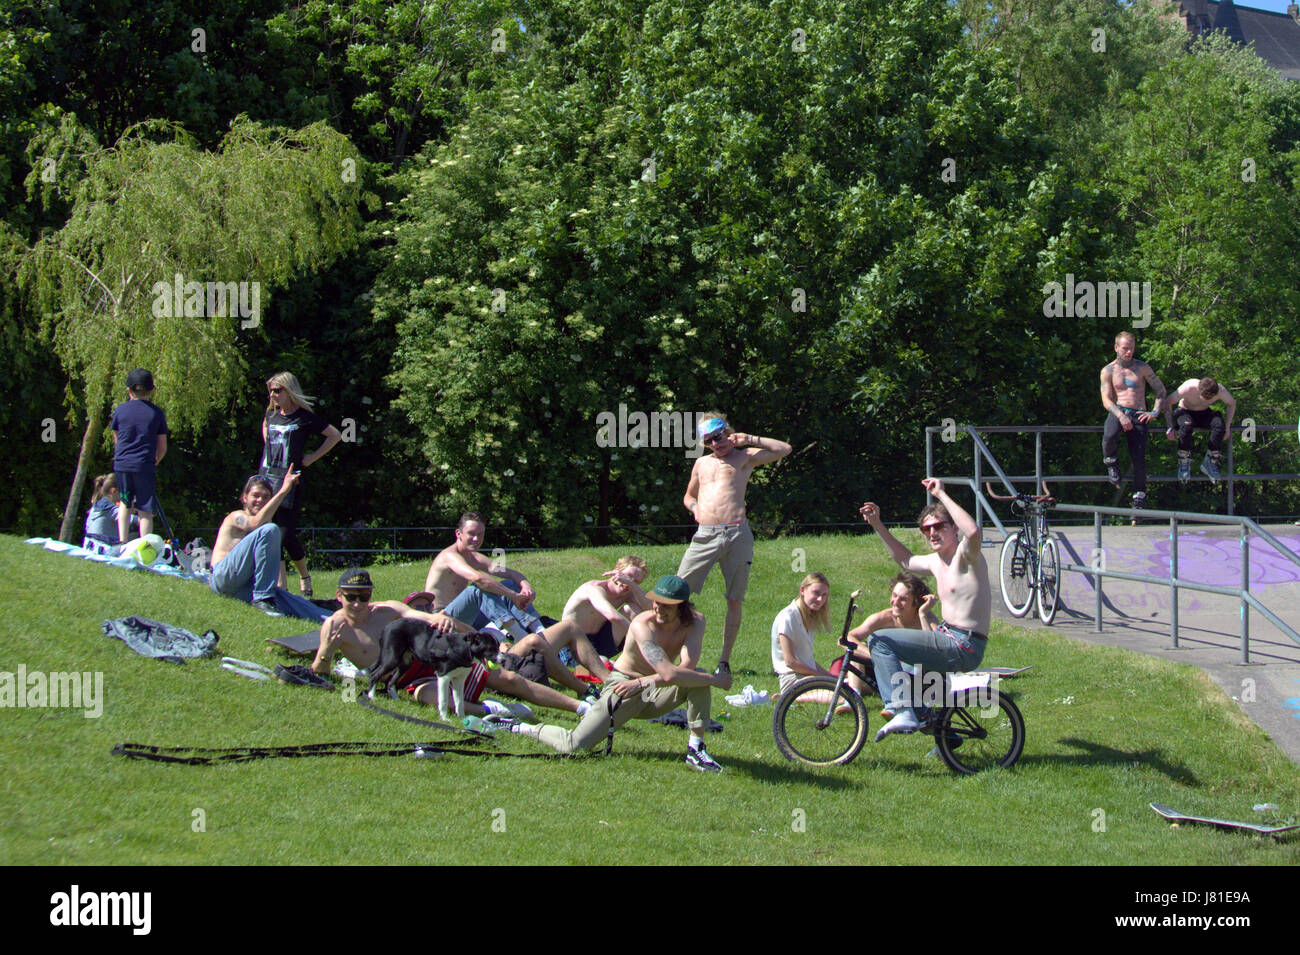 Glasgow, Scotland, UK. 26th May, 2017.  The weather brought Glaswegians out into the green spaces of George Square, the Botanics and Kelvingrove park as the temperatures soared for the second day in a row. Credit: gerard ferry/Alamy Live News Stock Photo